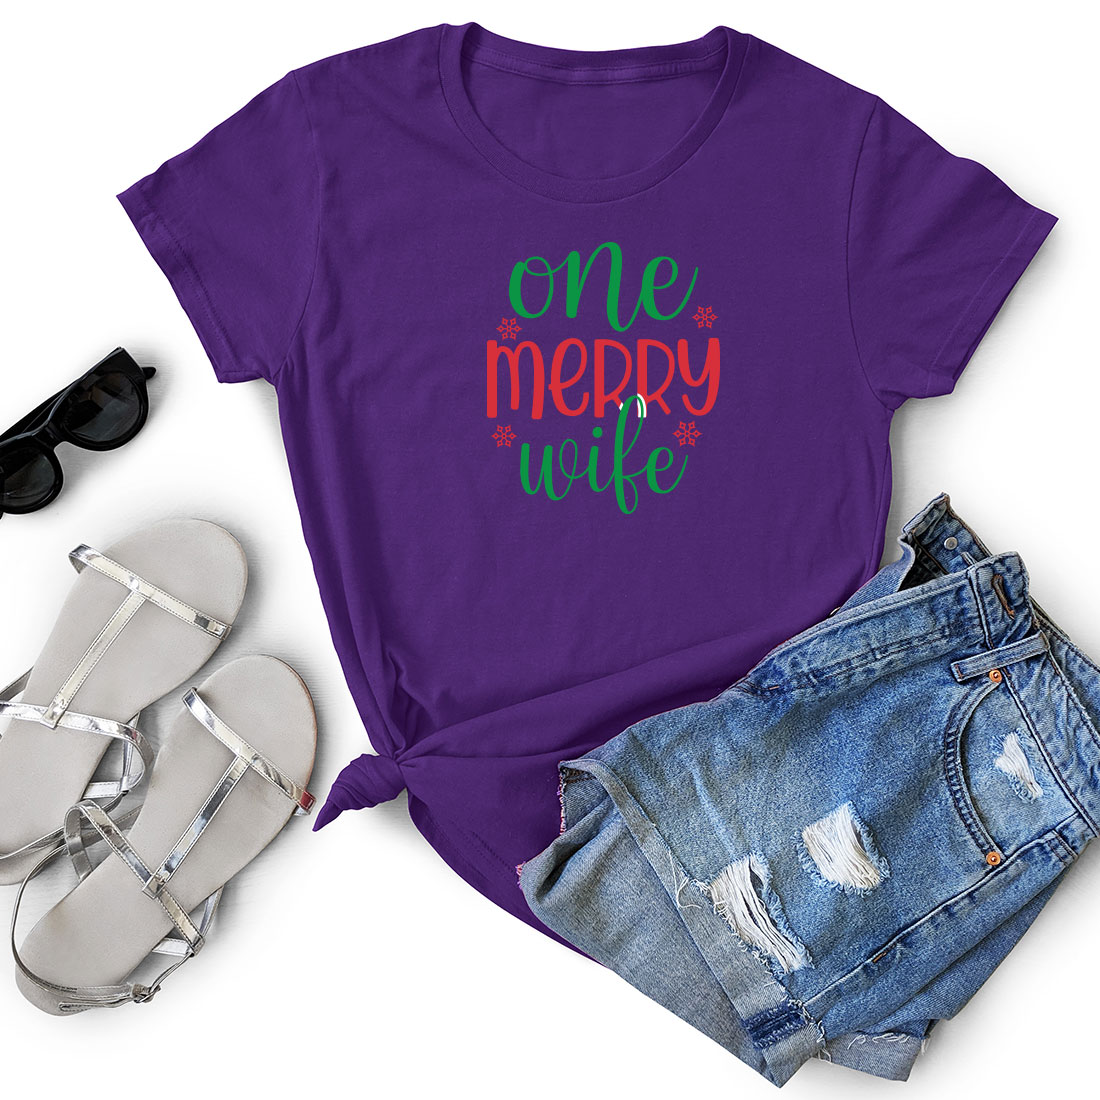 Purple t - shirt with the words one merry christmas written on it.